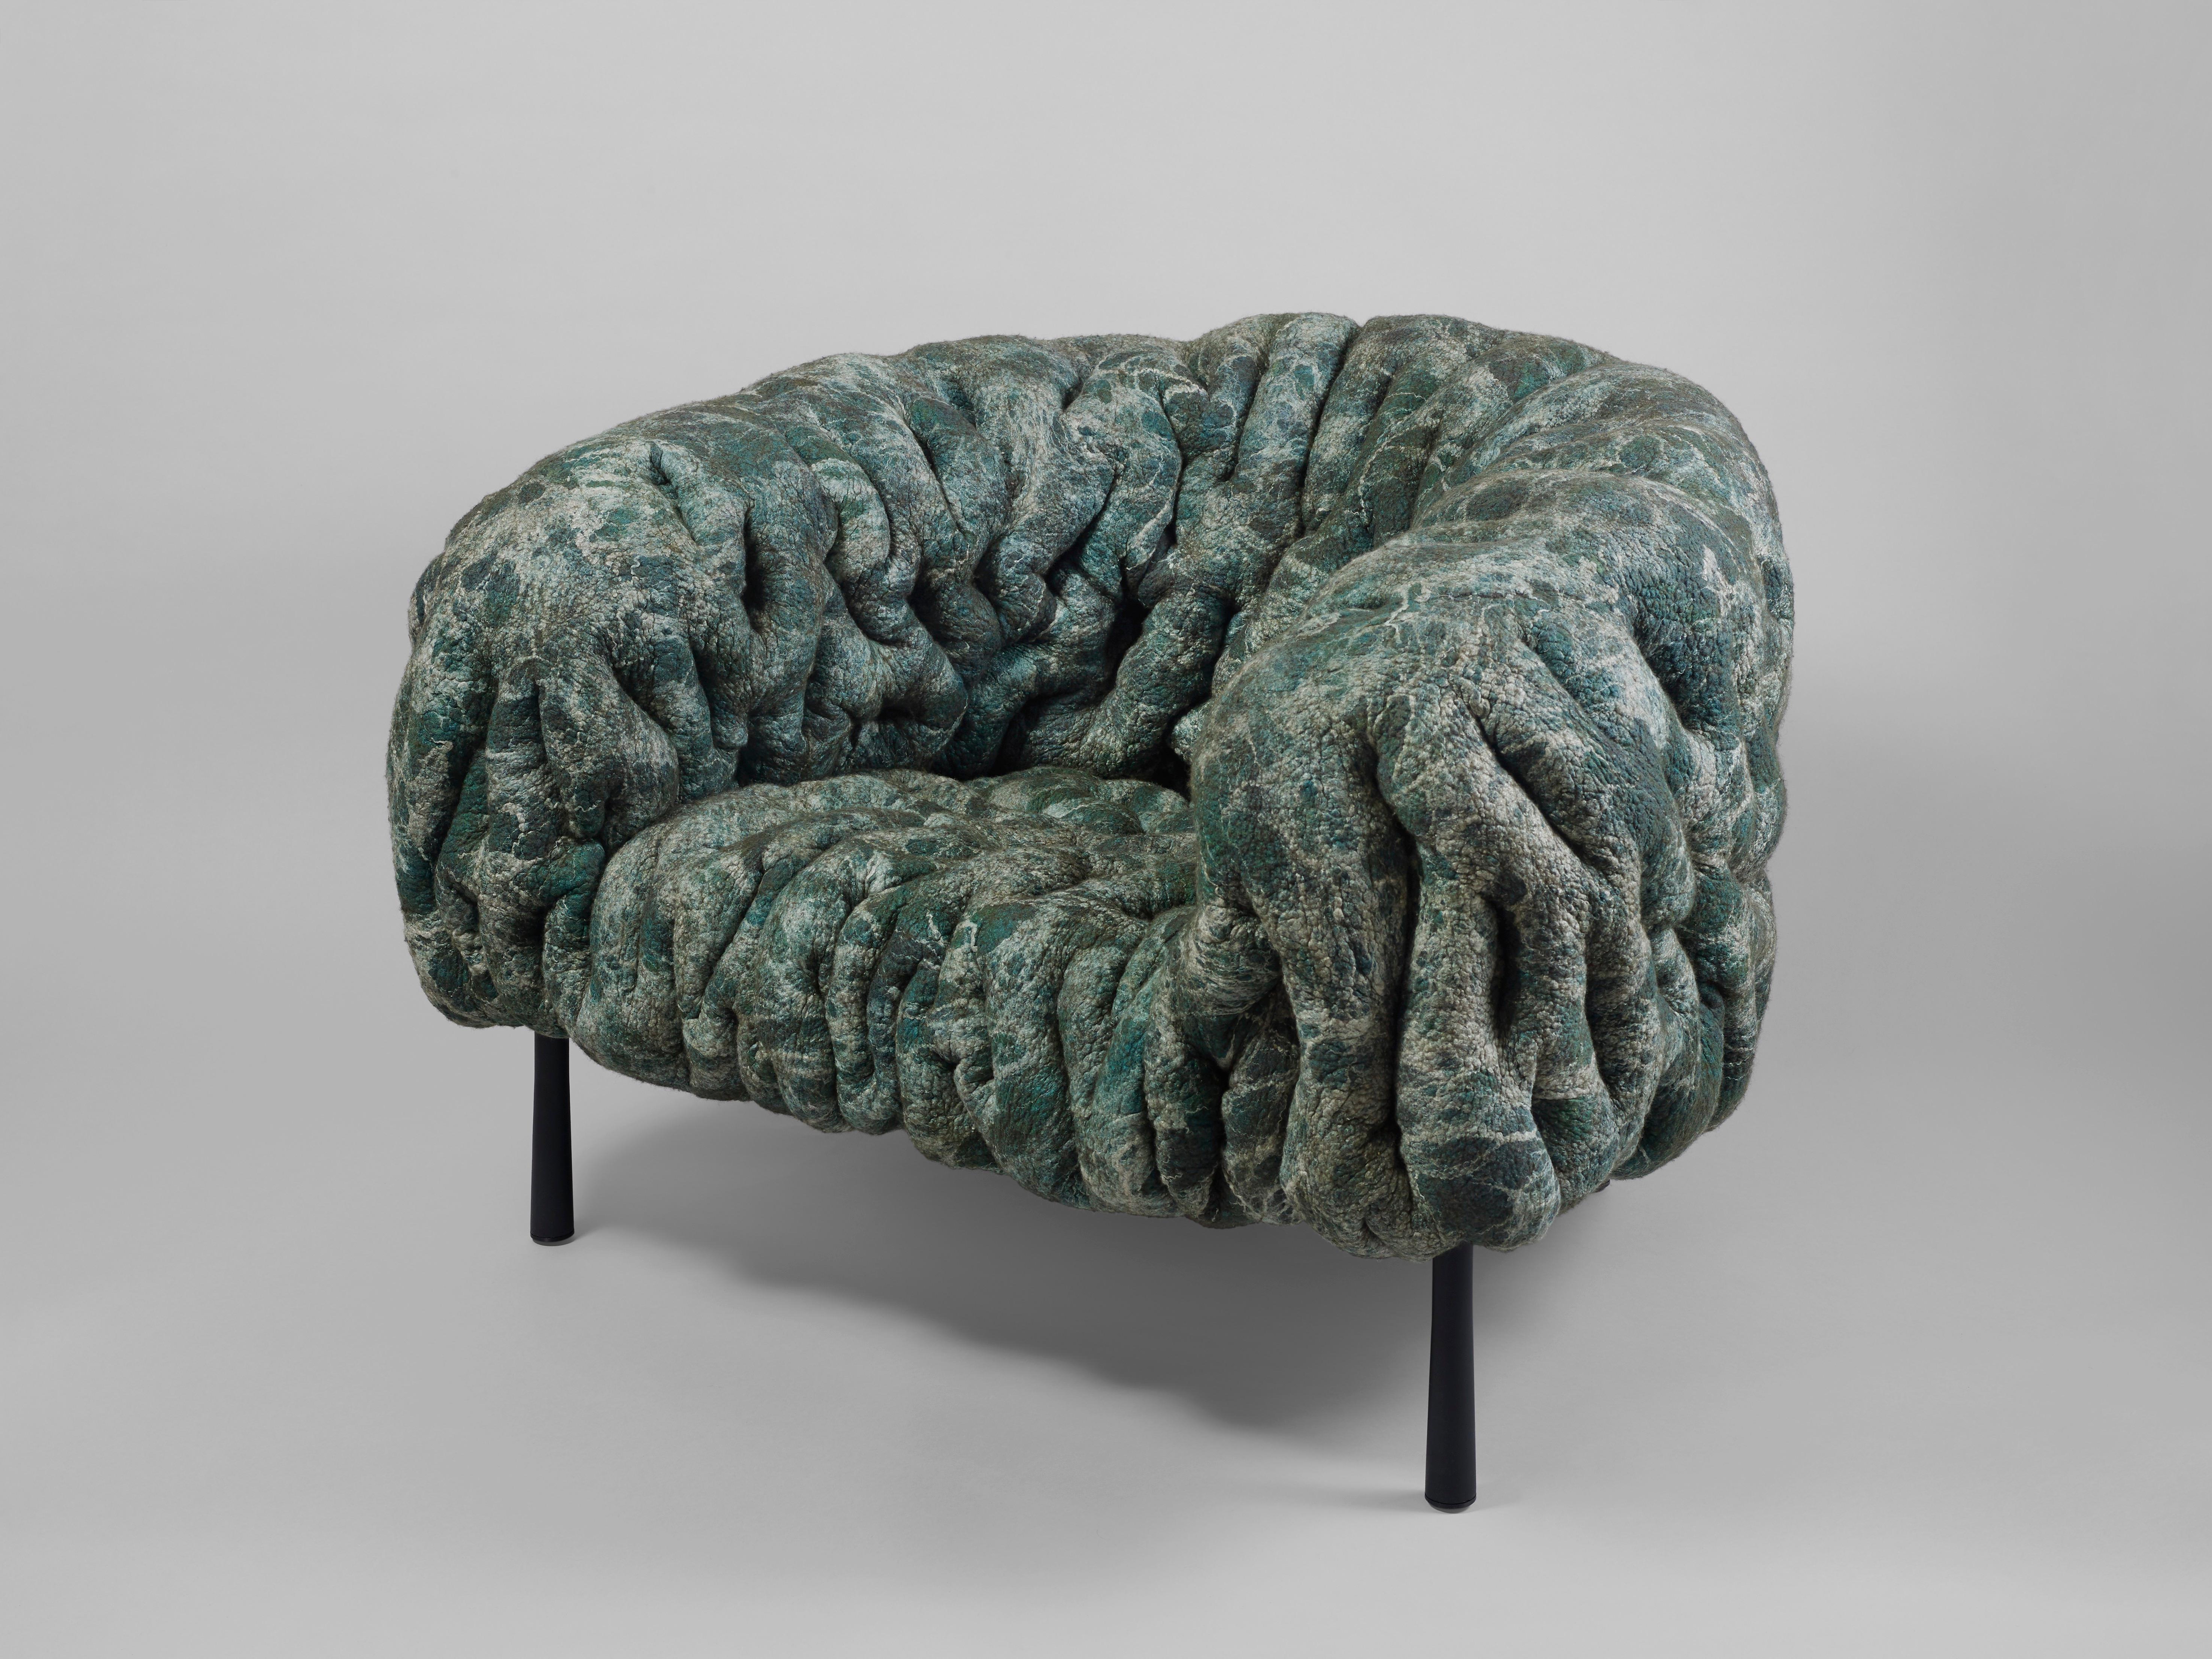 This 'Kuramura Pollock (Ocean)' armchair is a unique piece handcrafted by Ayala Serfaty featuring a deep green and white pattern and evoking Jackson Pollock’s drippings. World-renowned for her ‘SOMA’ series (her 